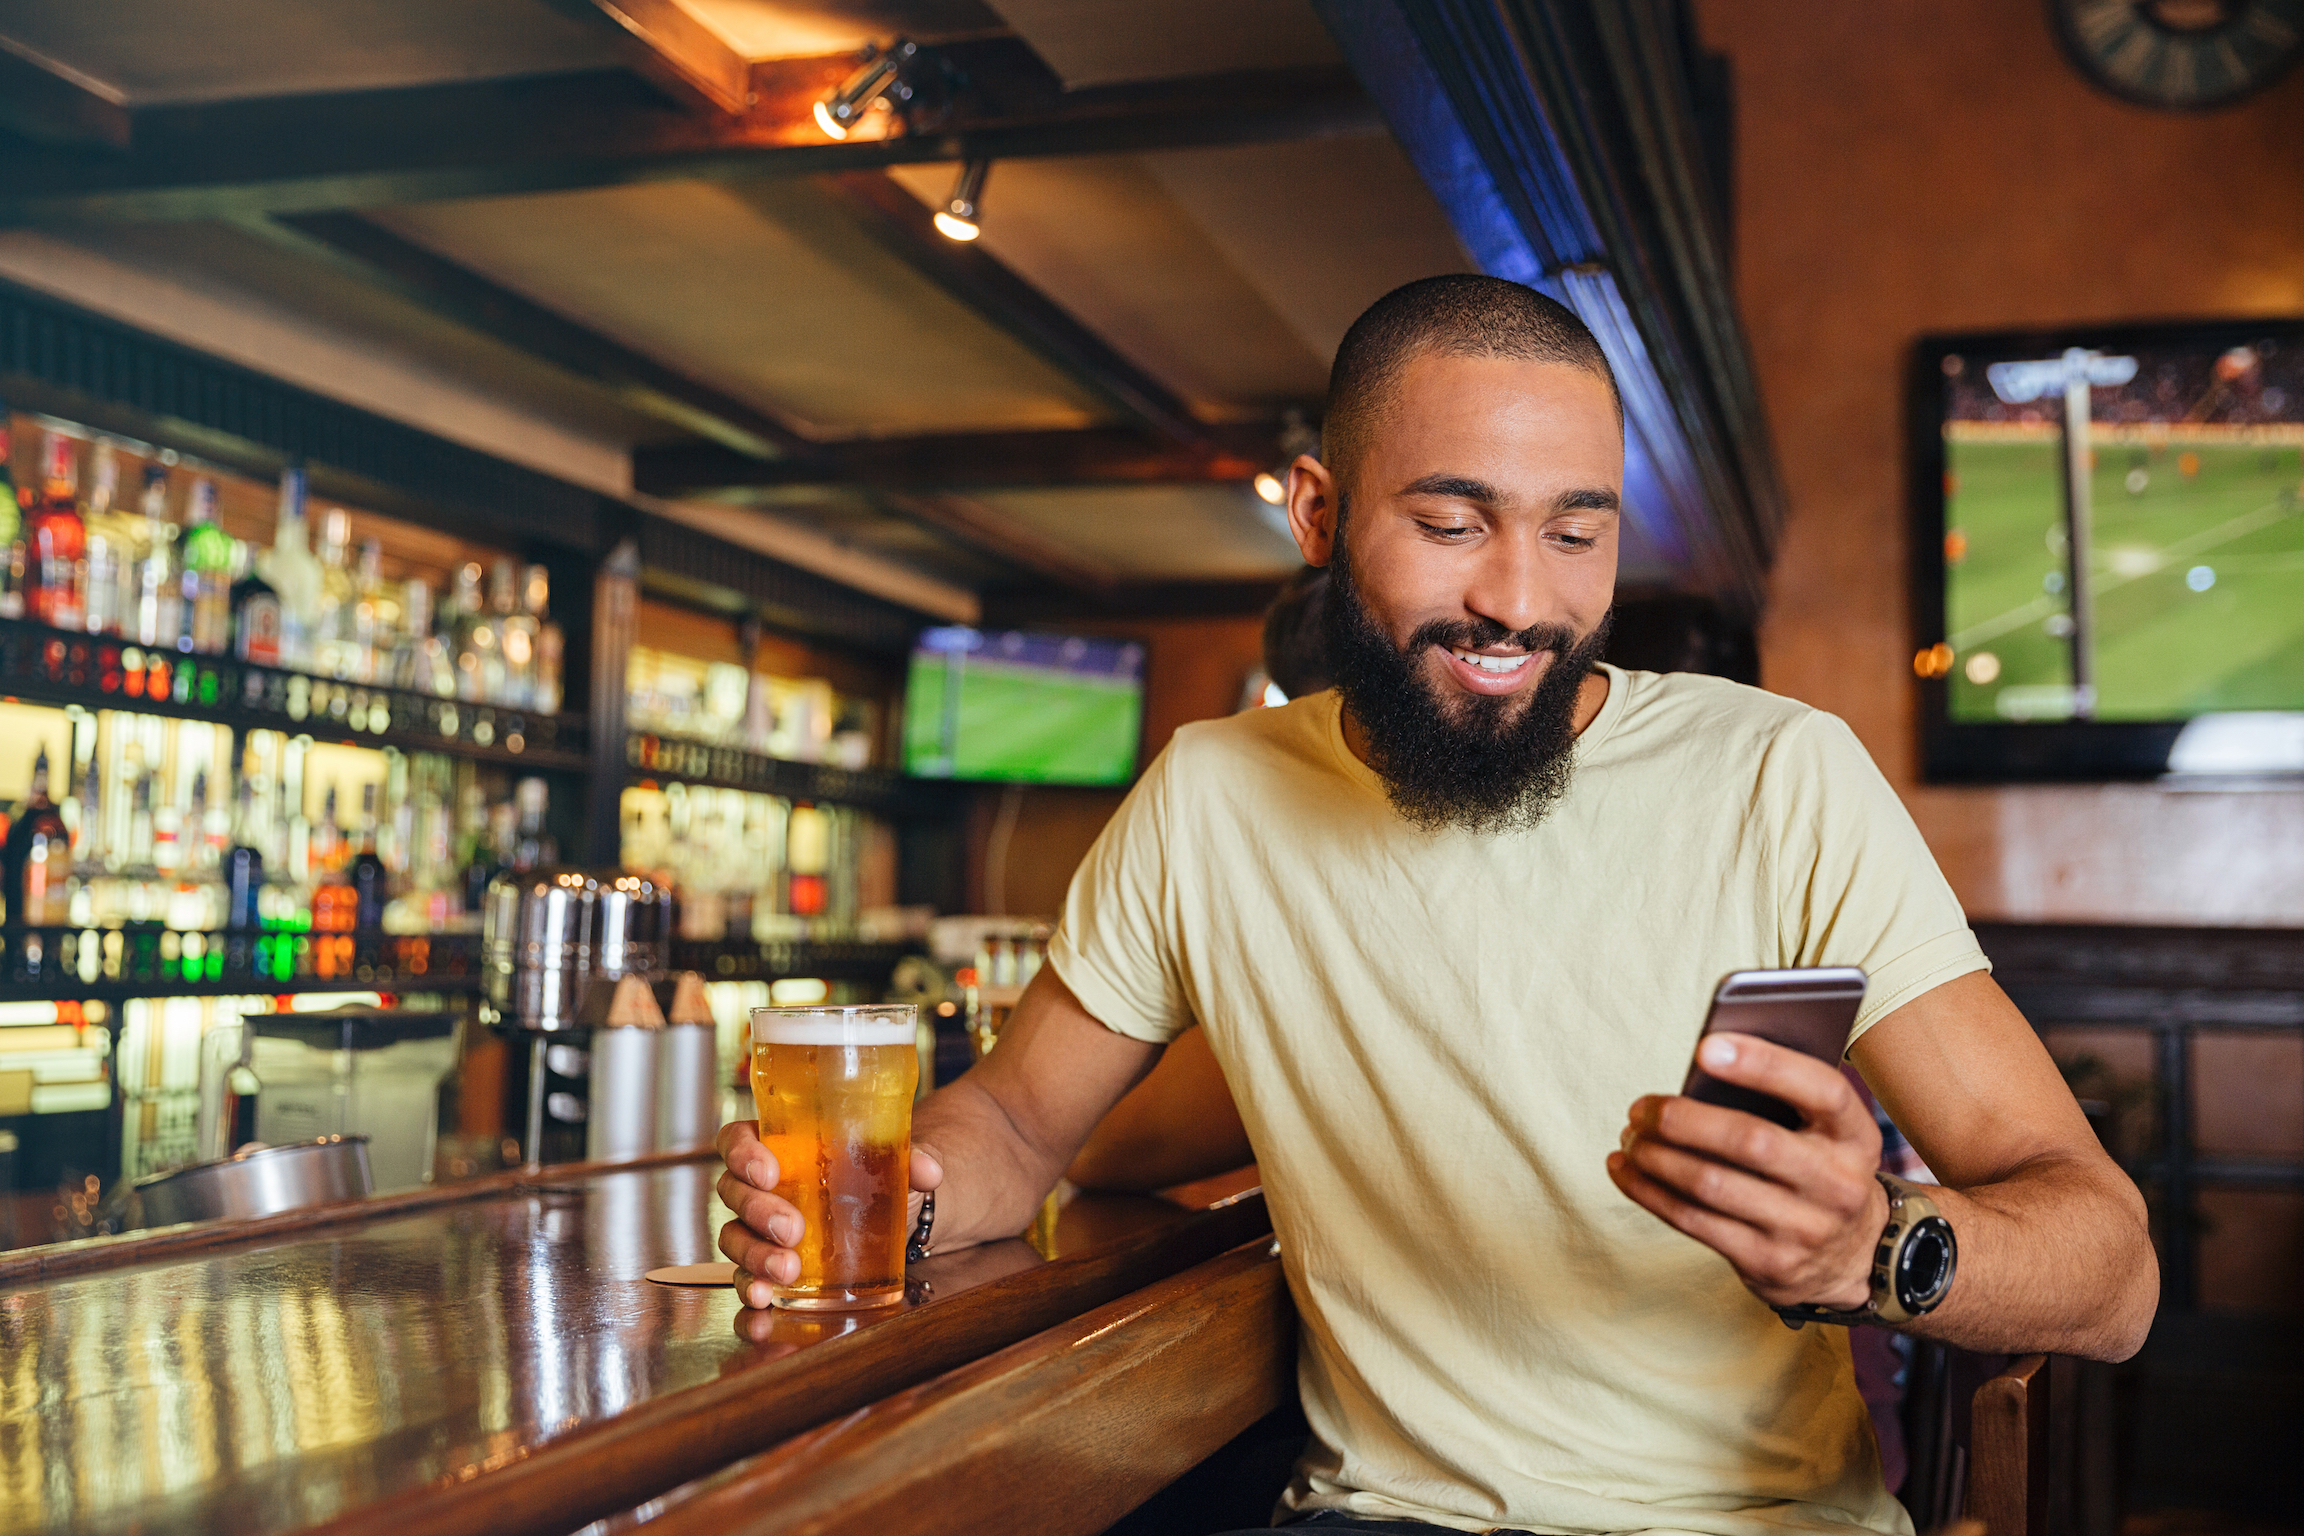 Attractive man in the bar smiling